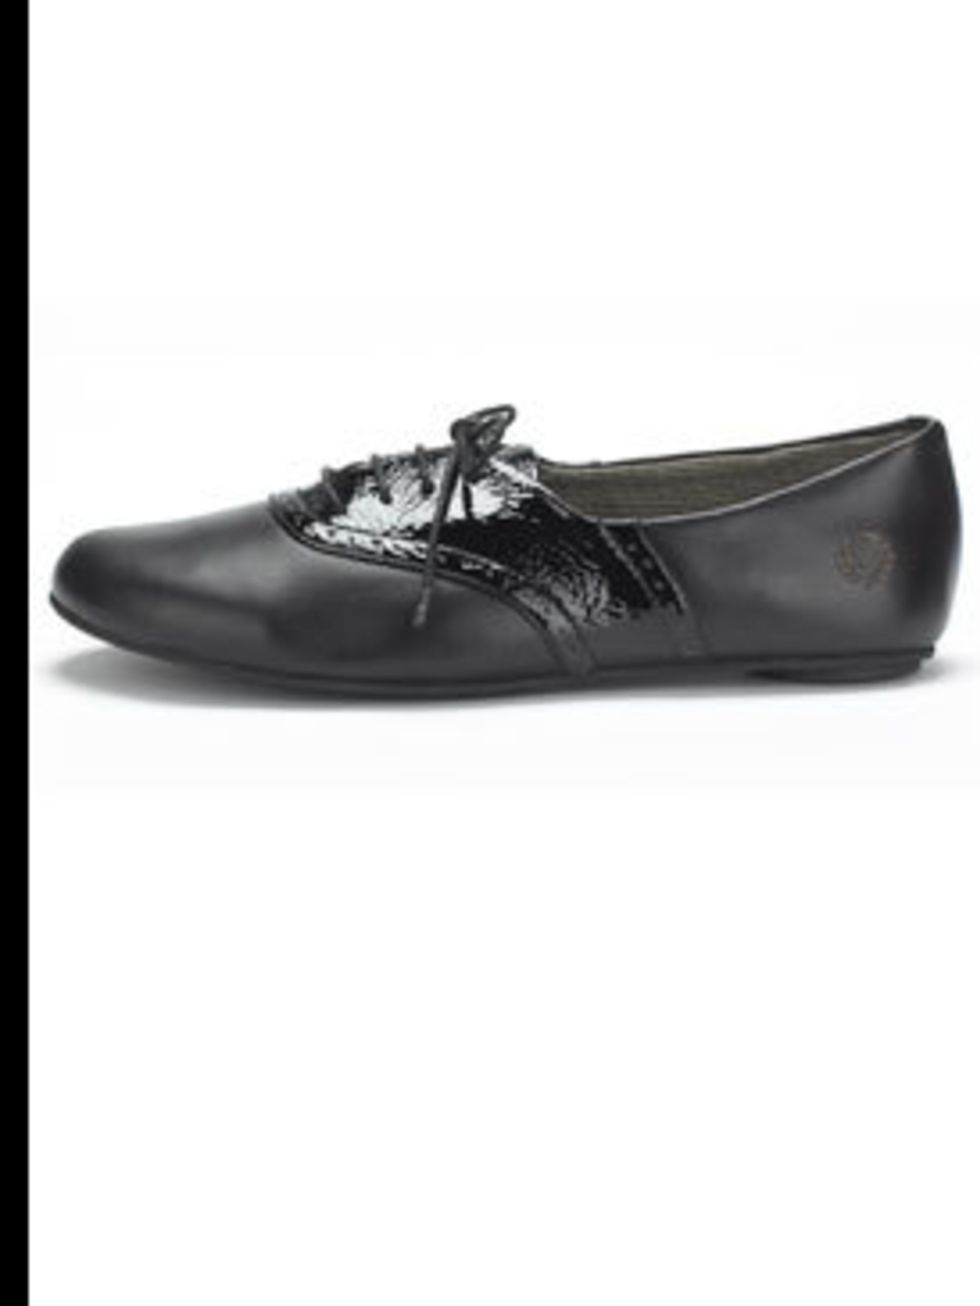 <p>Black patent brogues, £60, by Fred Perry at <a href="http://www.office.co.uk/perl/go.pl/home.html">Office</a></p>